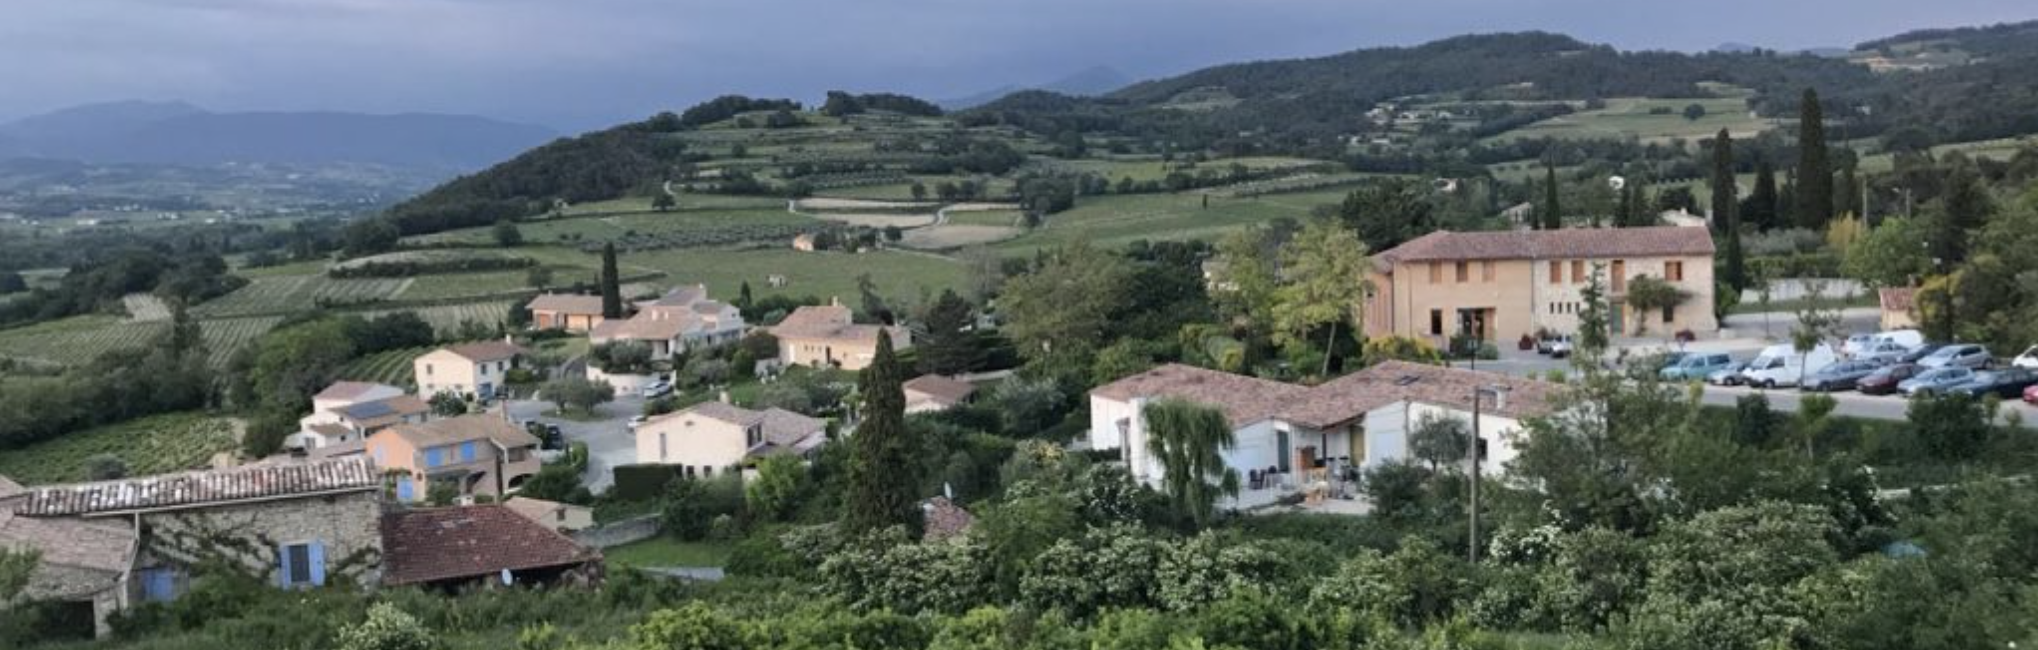 Abstecher in die Provence